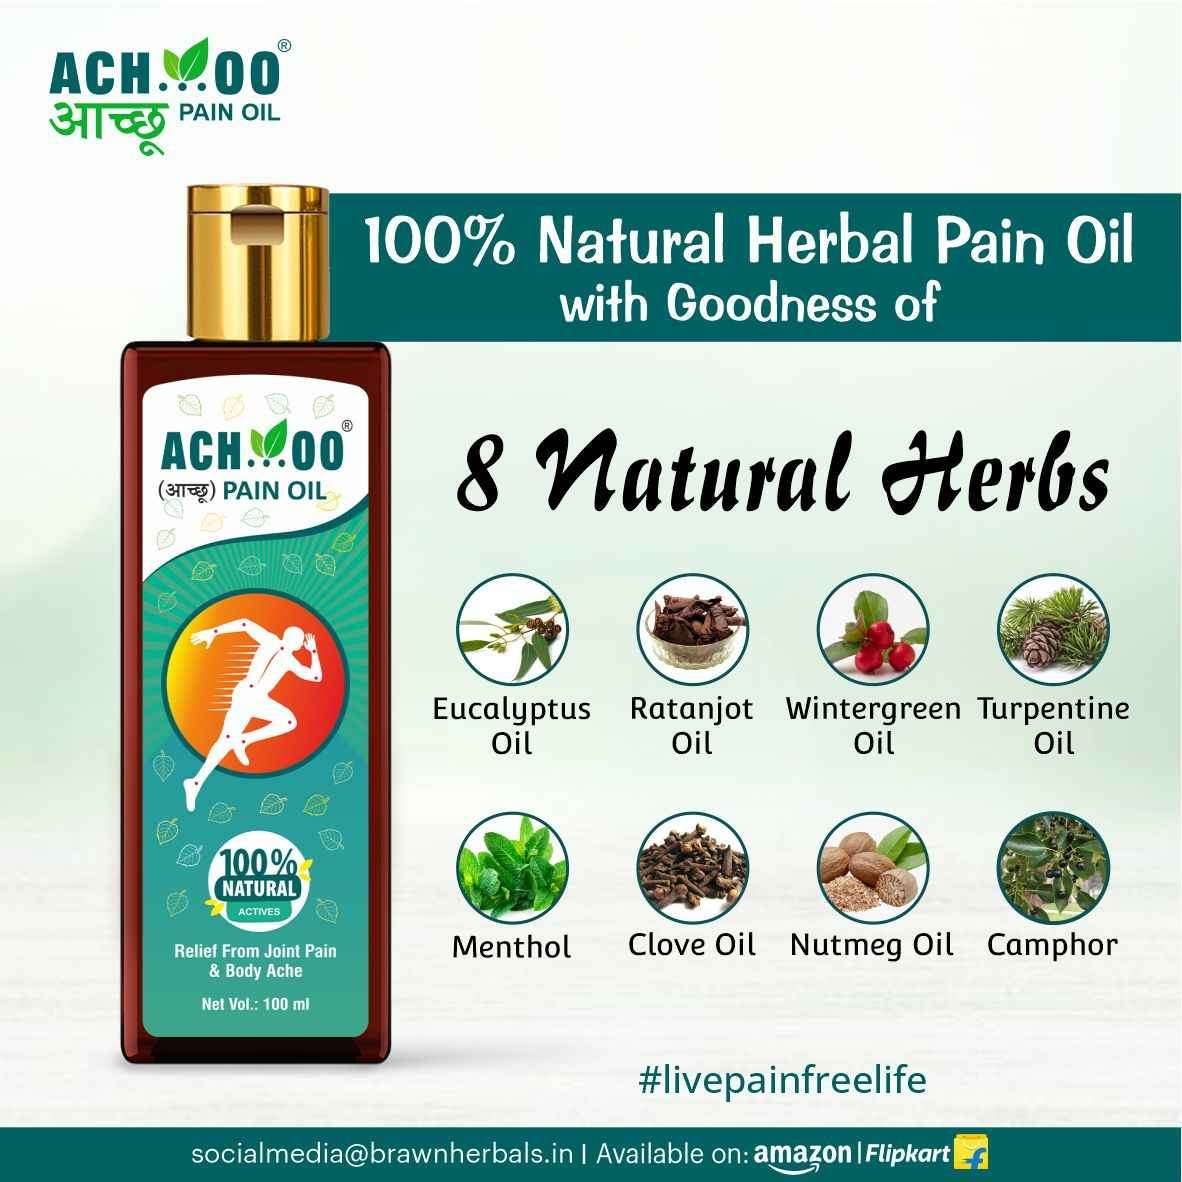 Achoo Pain Relief Oil is an ayurvedic pain relief oil for faster and longer pain relief.